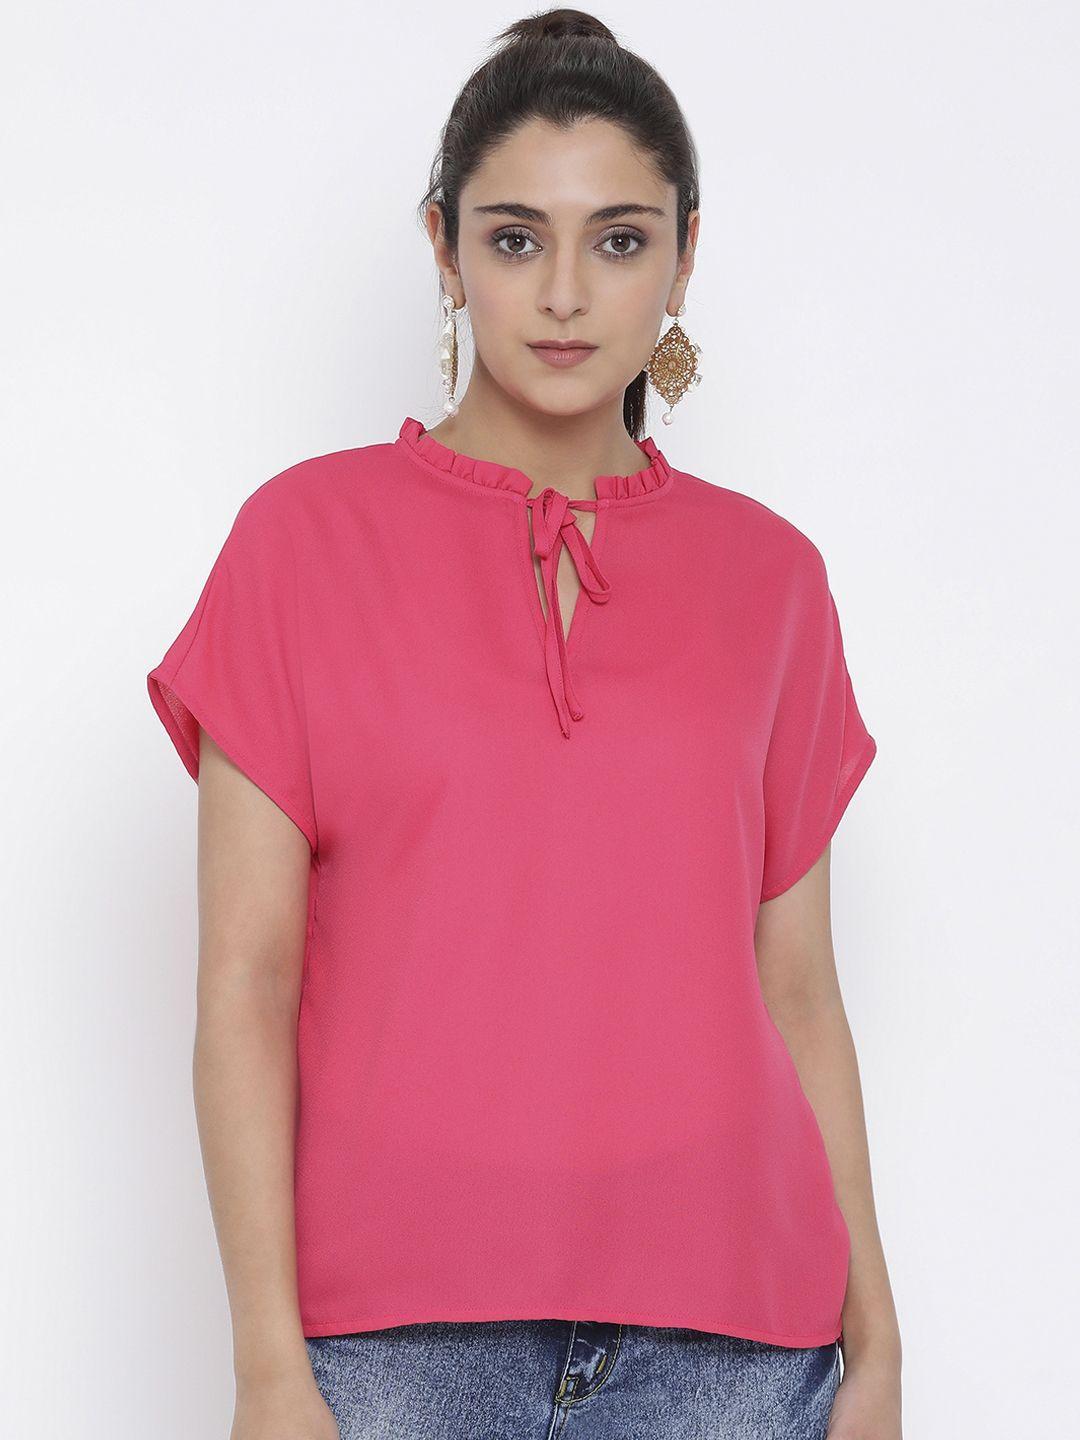 oxolloxo women coral pink solid top